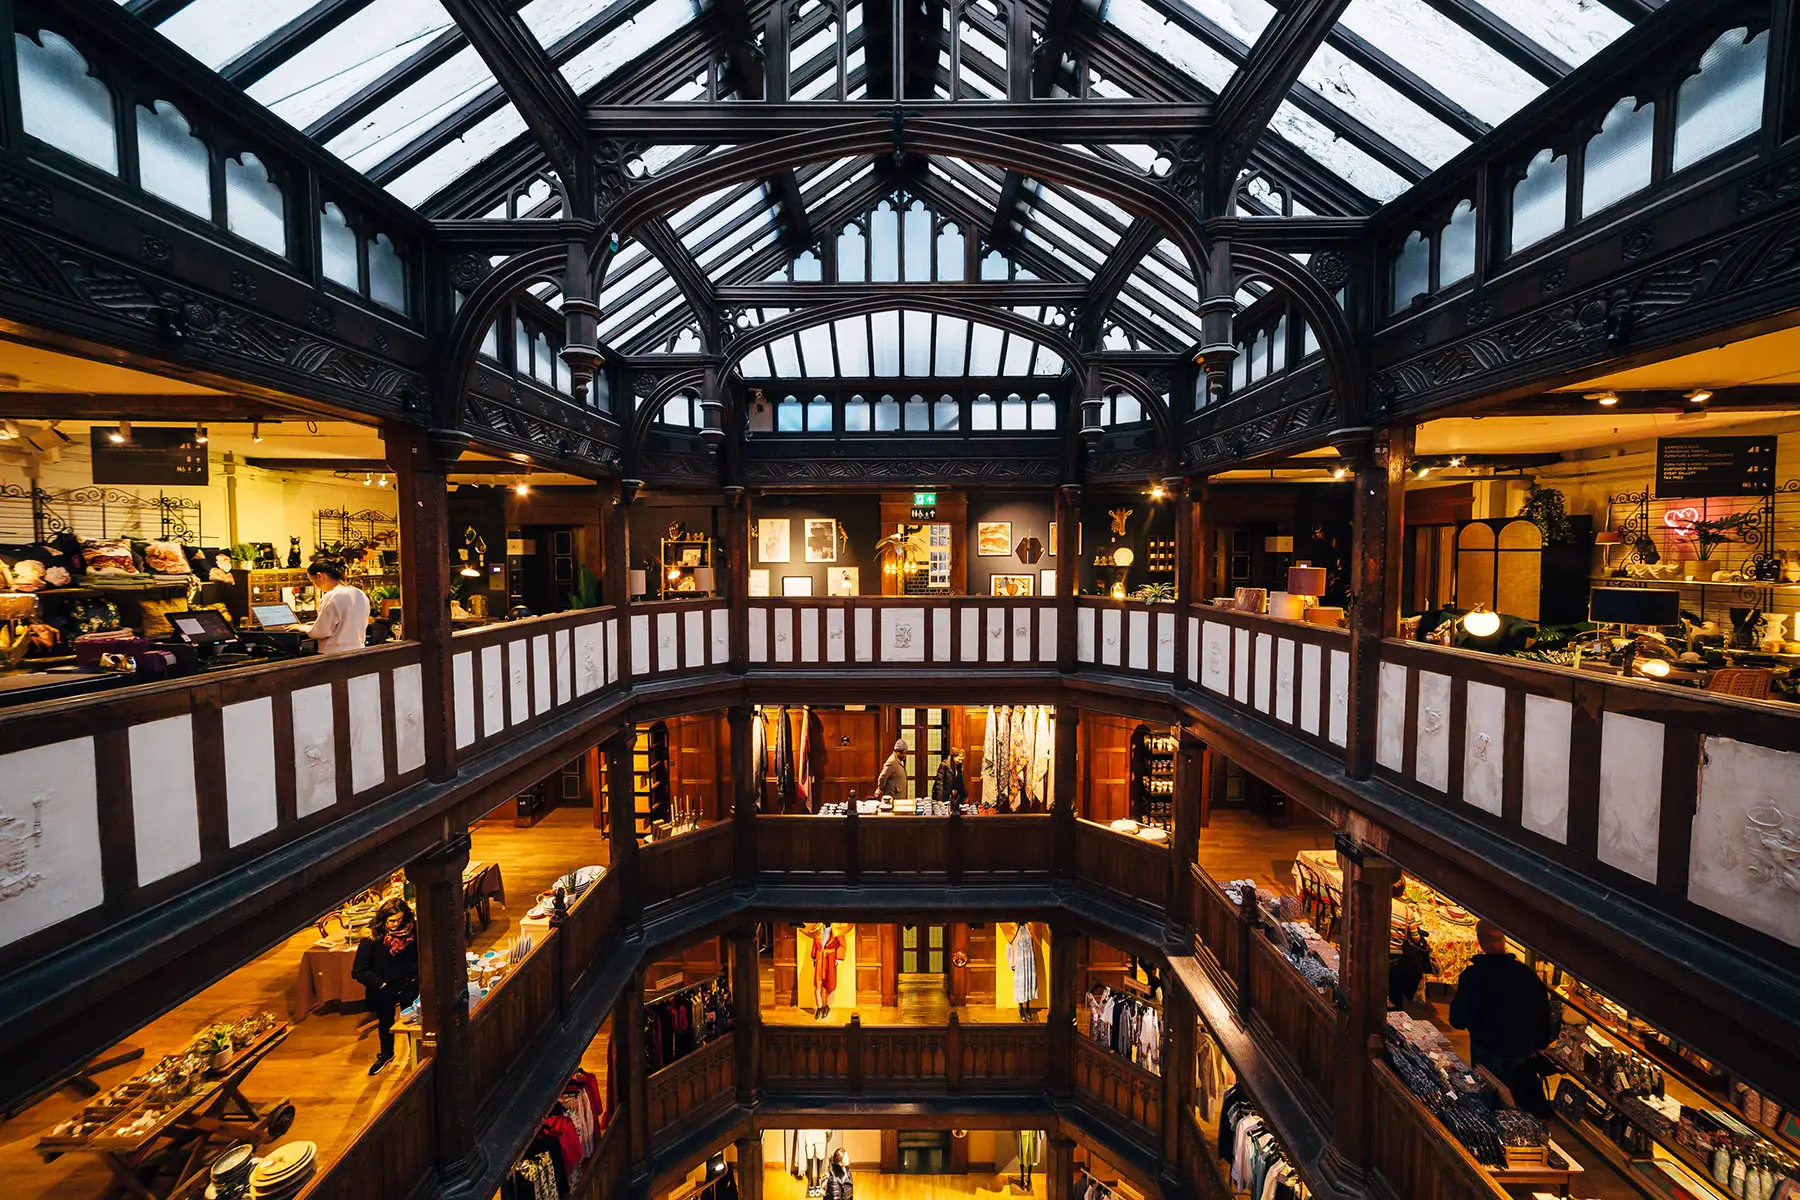 Interior of the Liberty department store in London, UK